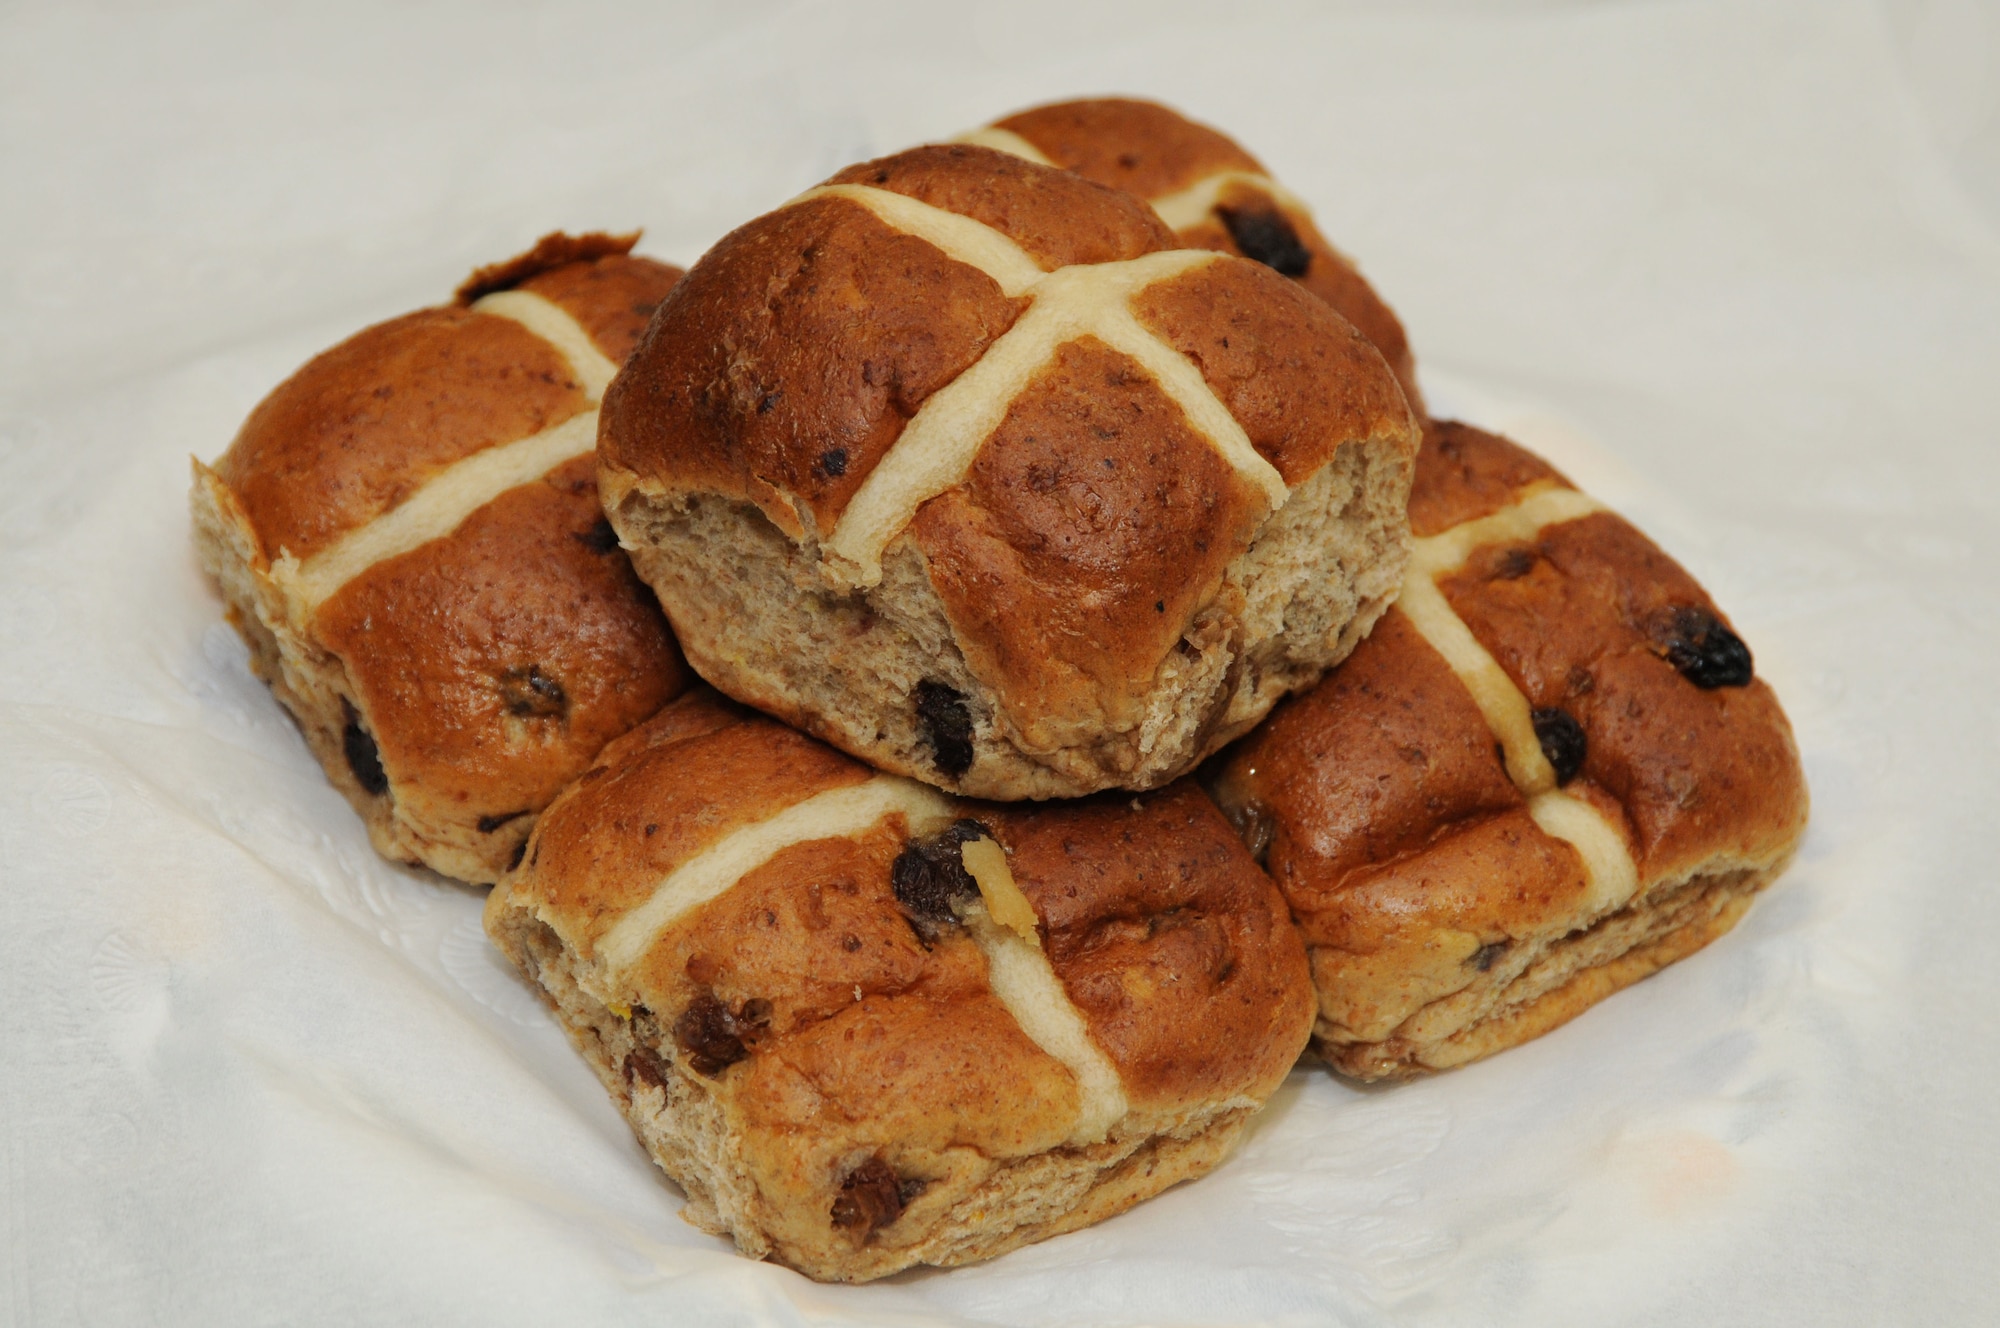 Hot cross buns are a quintessentially British tradition at Easter. They can be eaten warm or split, toasted with butter for breakfast, tea or a snack. No one knows for certain when the tradition began, but in 16th century England, bakers were limited by law to occasions when these special doughs could be made. Good Friday was one; ‘cross buns’ marked this holy day towards the end of the Lenten fast. (U.S. Air Force photo by Staff Sergeant Lausanne Kinder)